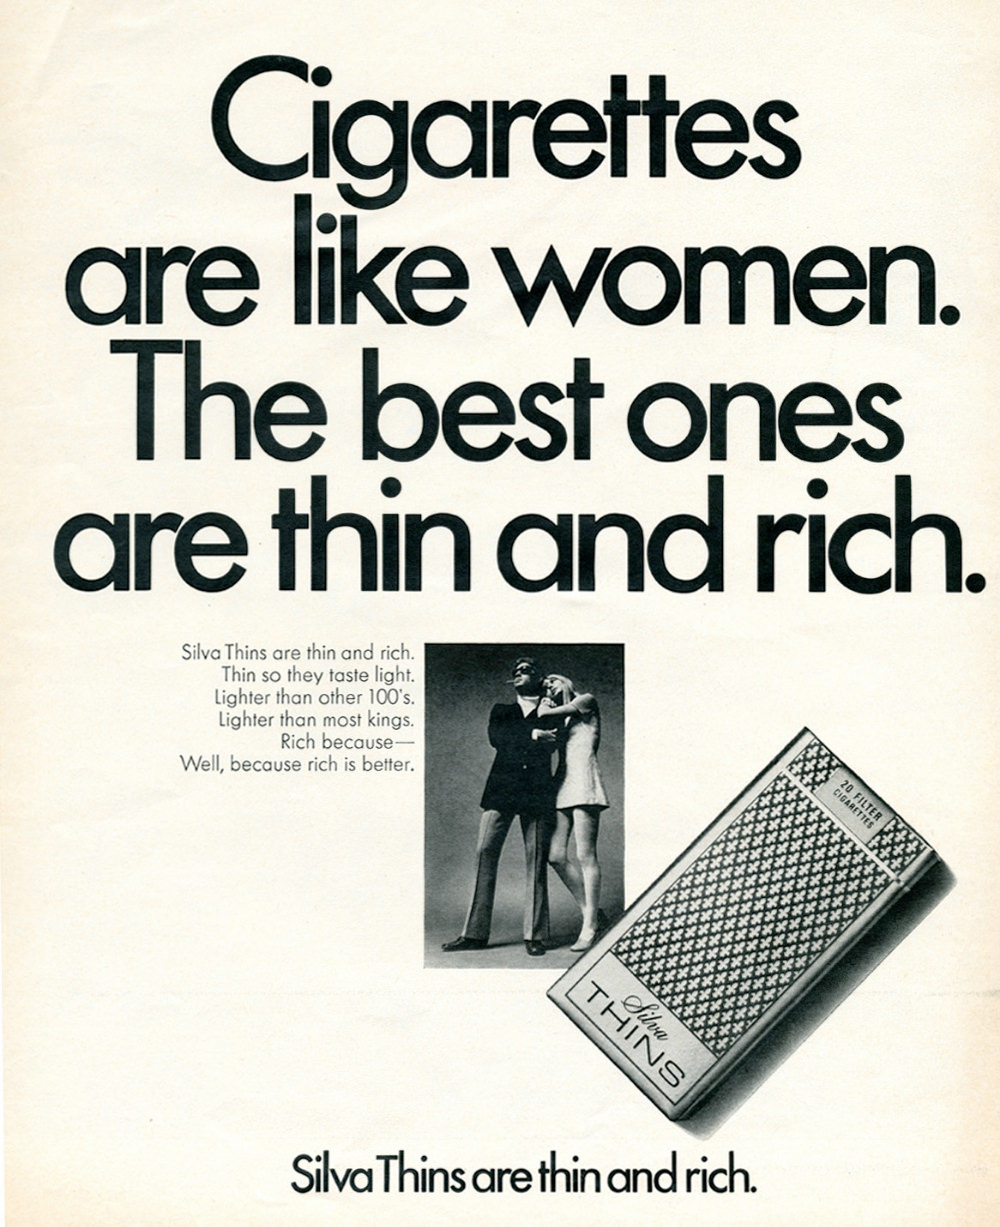 Vintage Vibrancy: A Look at the Bold and Controversial Silva Thins Ads of the 1960s